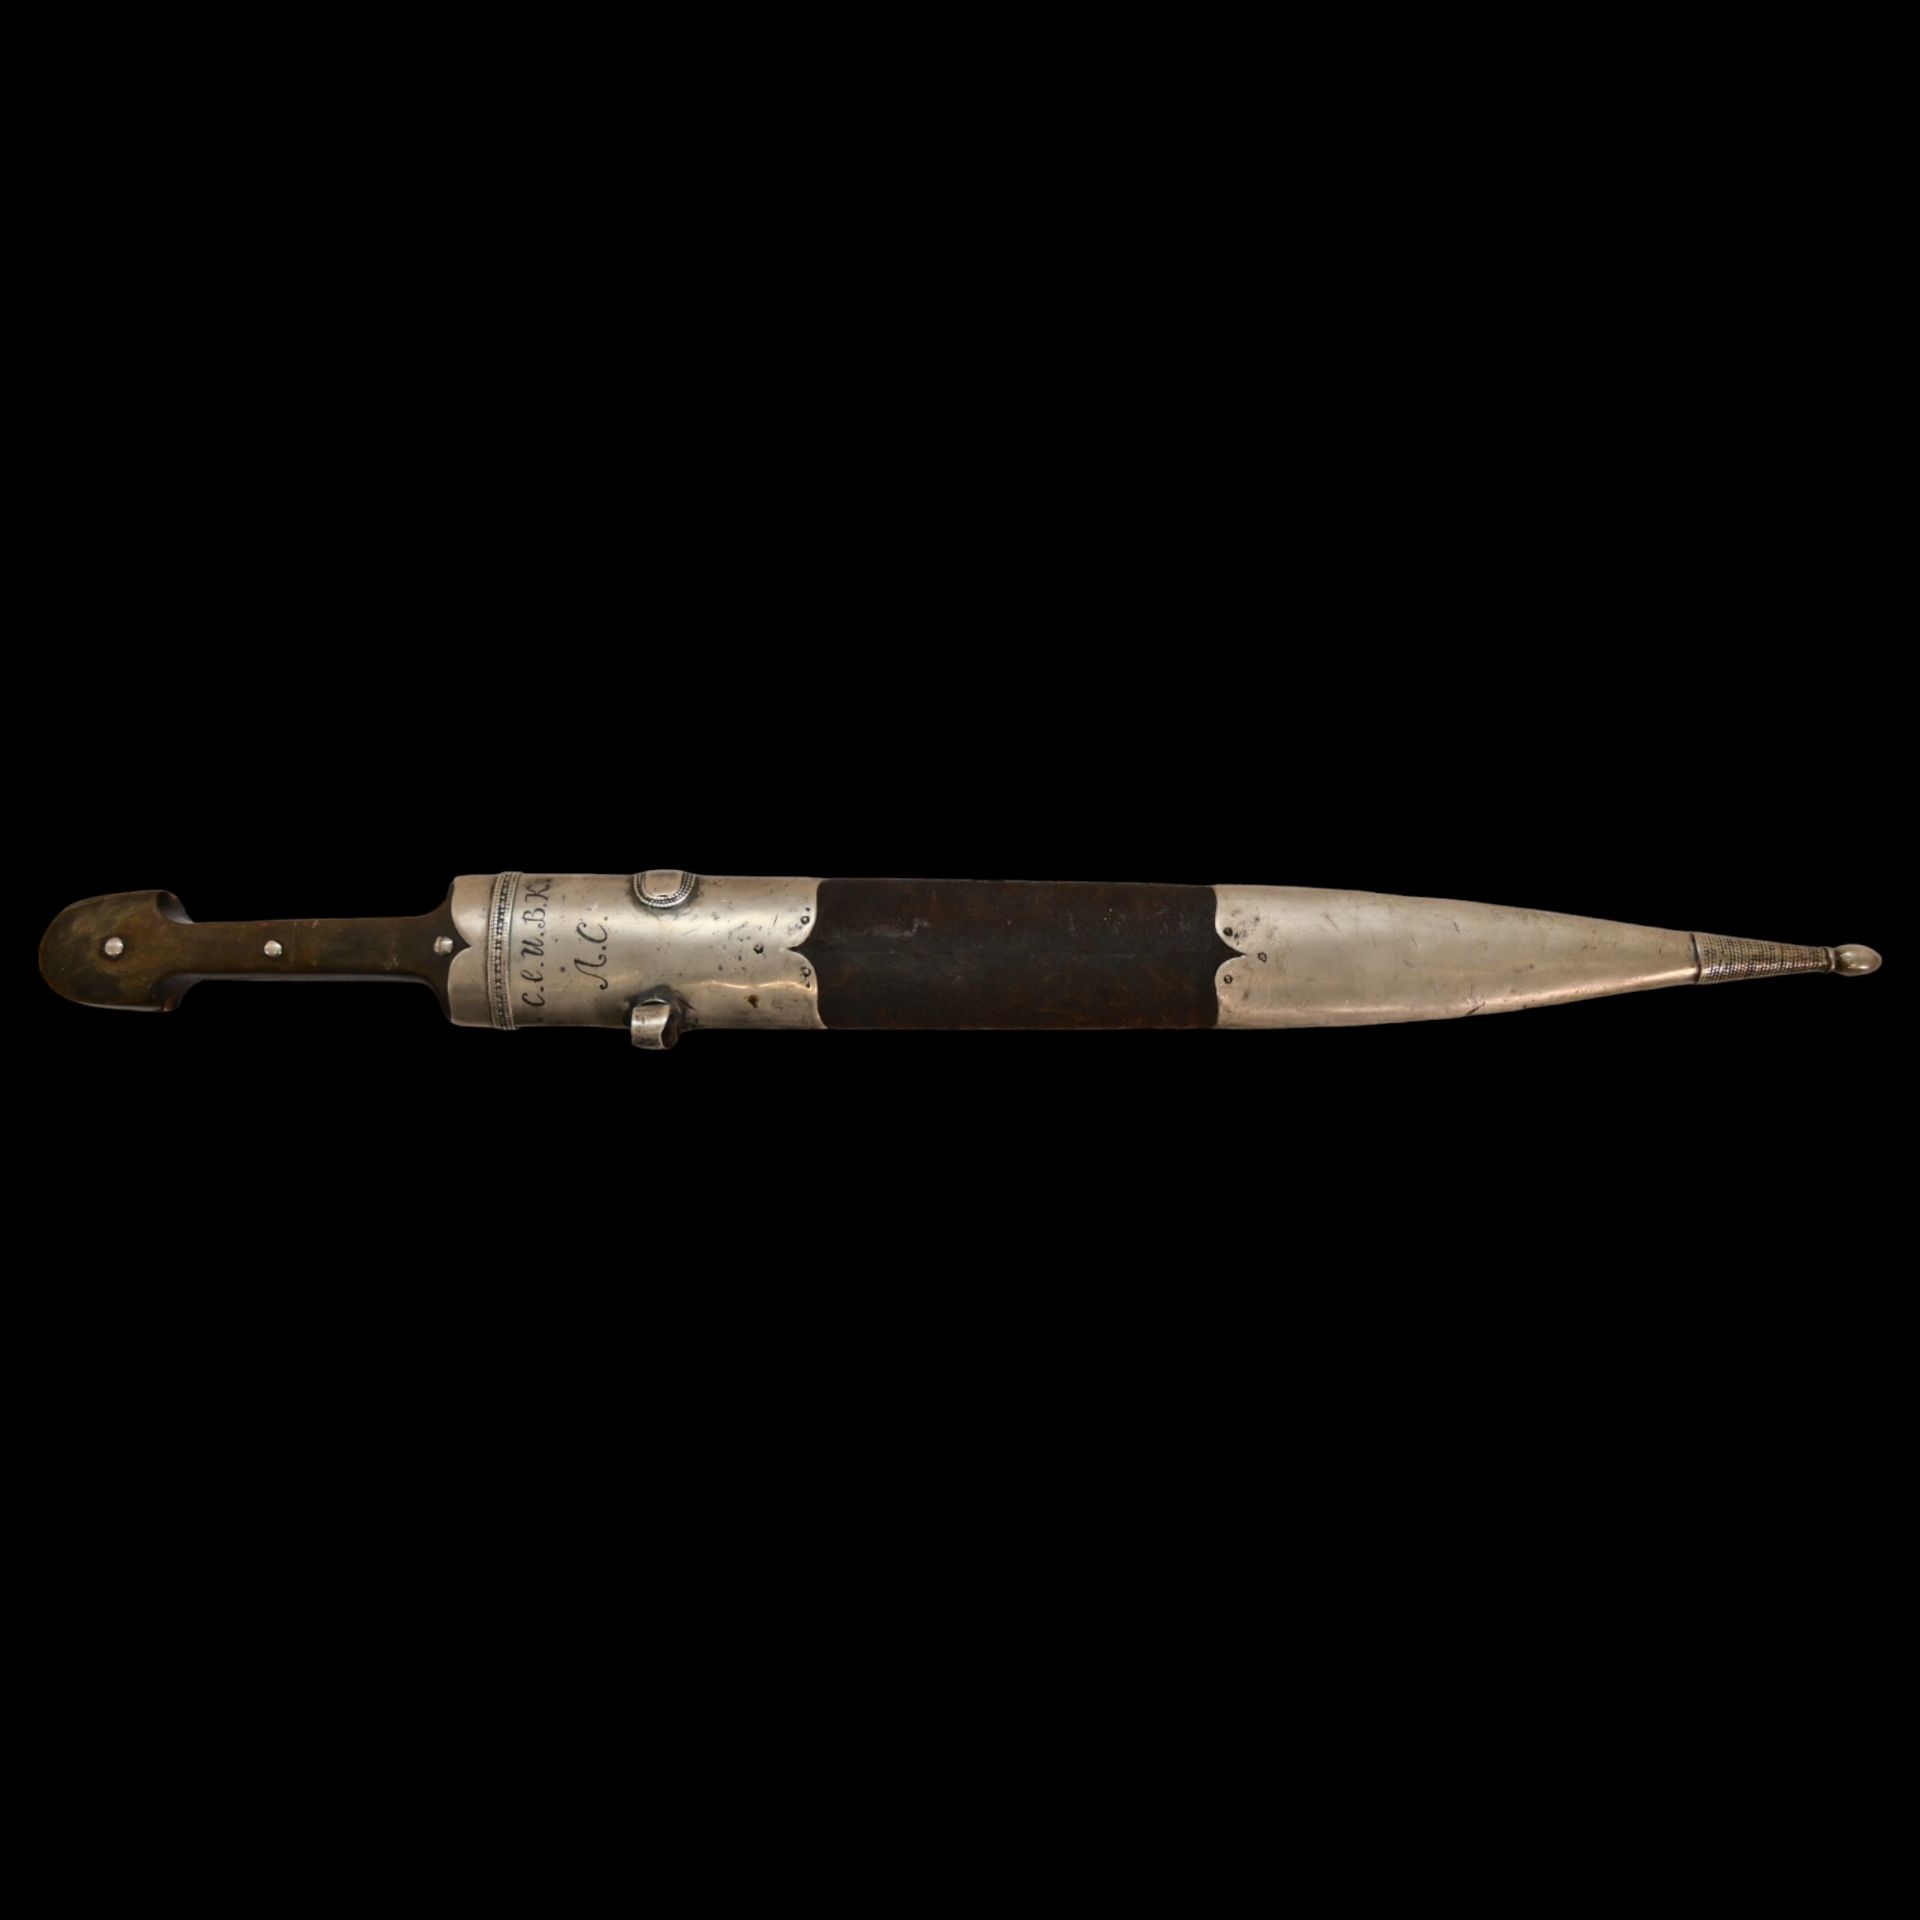 Caucasian Kama Dagger, silver, engraved, niello, His Imperial Majesty's Own Convoy, circa 1900. - Image 7 of 10